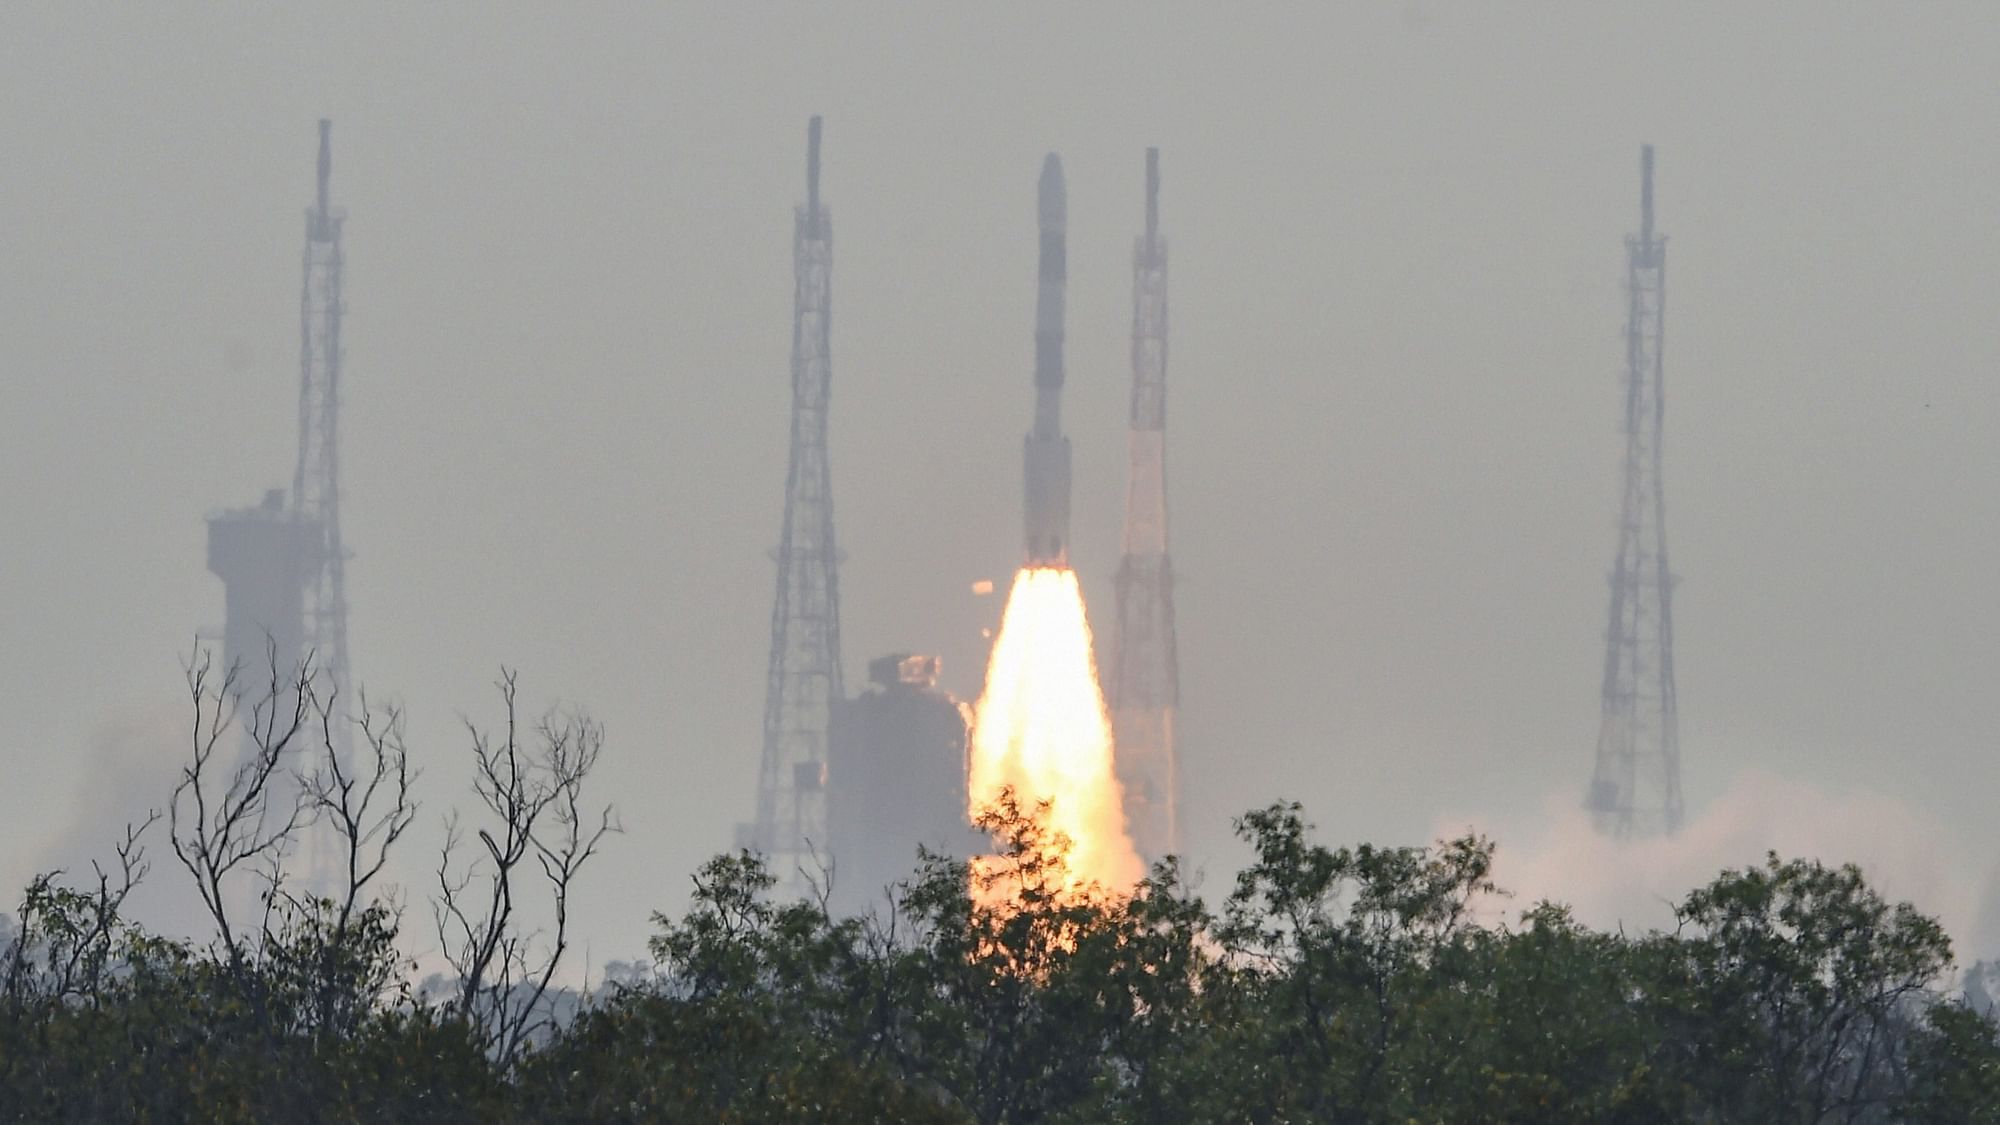 ISRO successfully launched the EMISAT and 28 other foreign satellites on-board the PSLV-C45 from Sriharikota on Monday, 1 April.